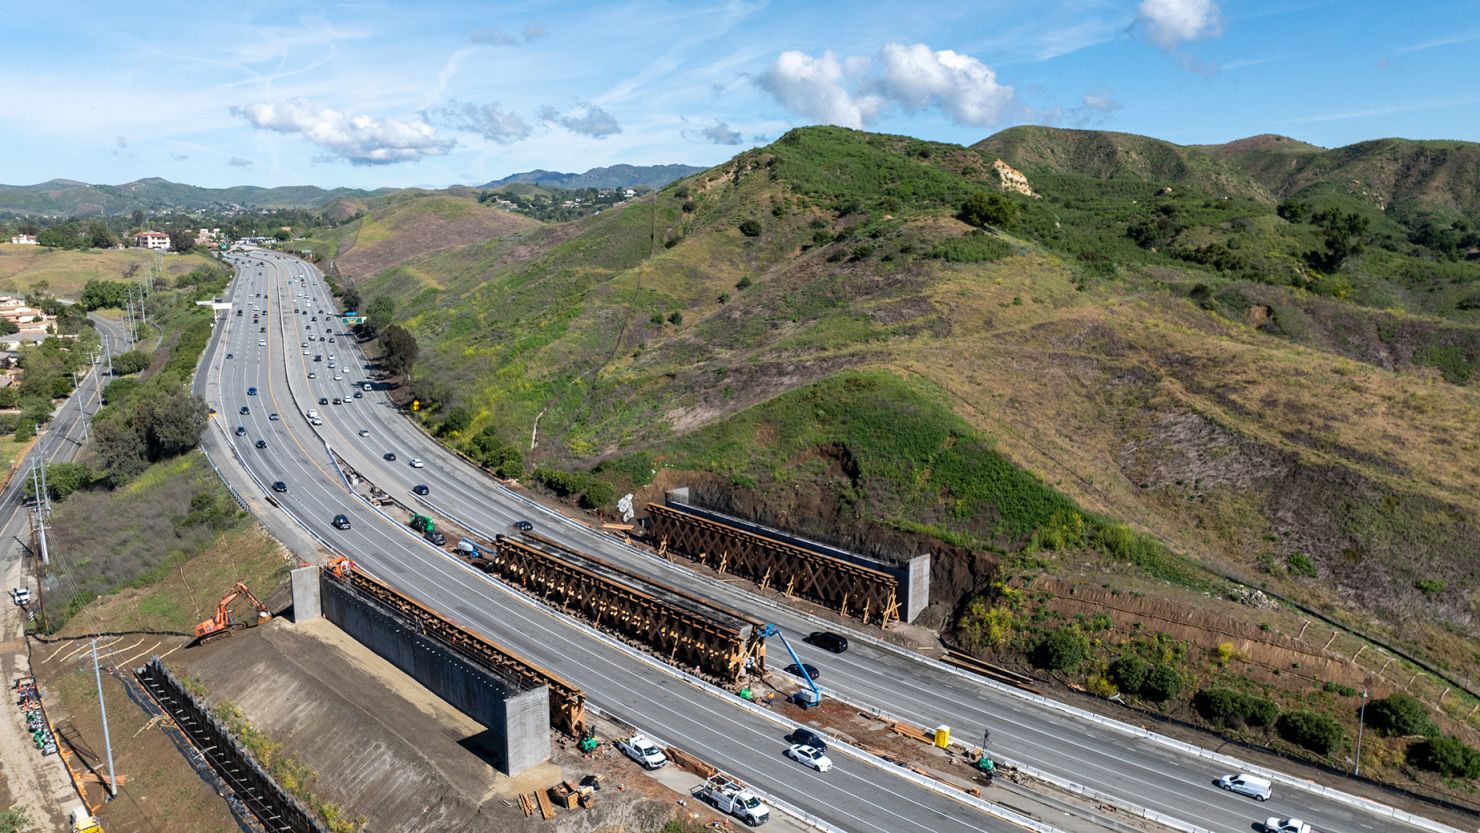 Construction has begun on a wildlife crossing that will allow animals to pass safely from the Santa Monica Mountains into the Simi Hills of the Santa Susana mountain range.